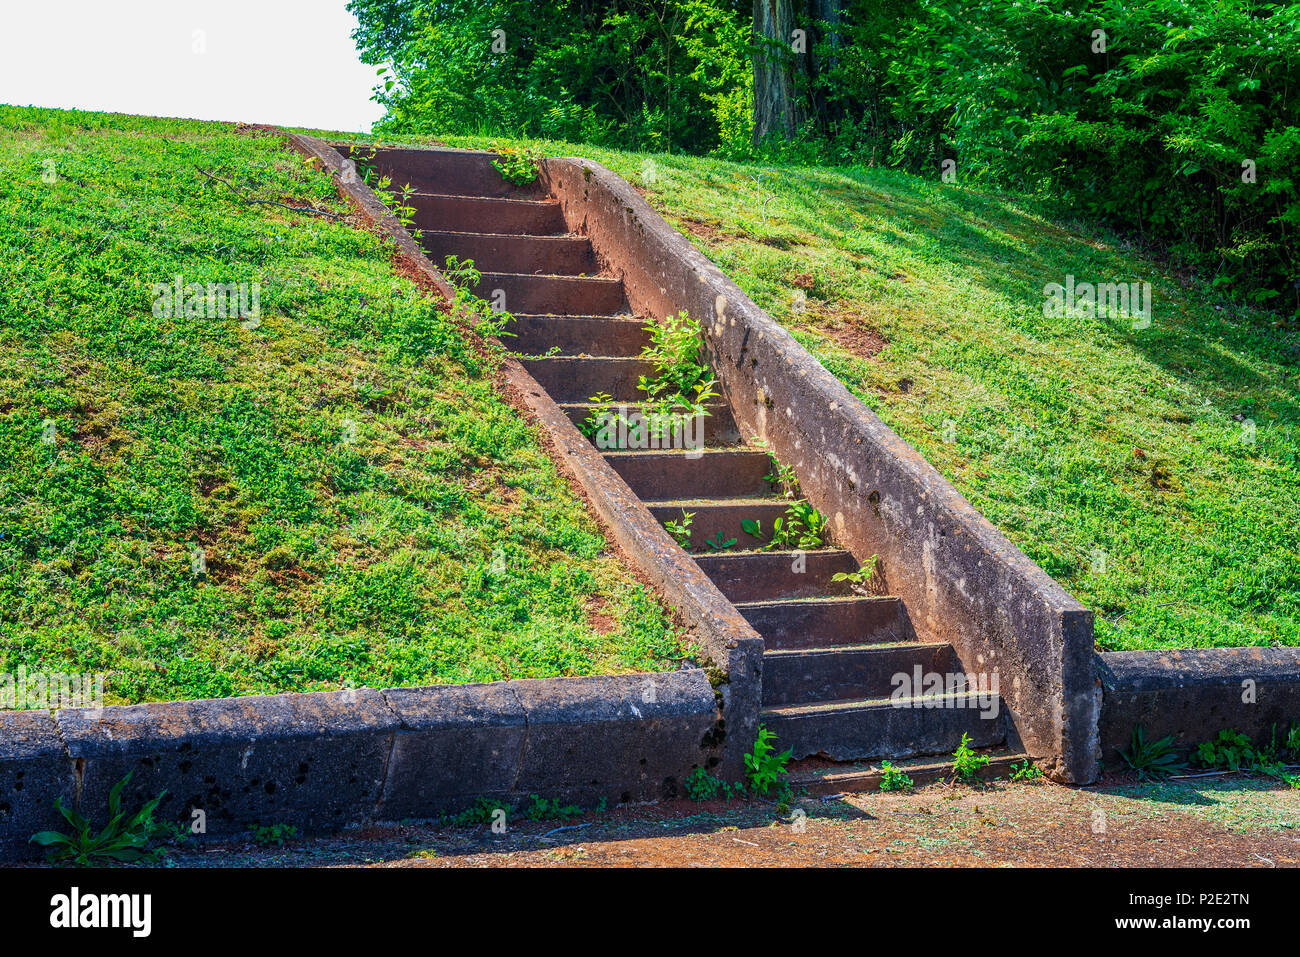 Old concrete steps going up a green grassy hill. Stock Photo